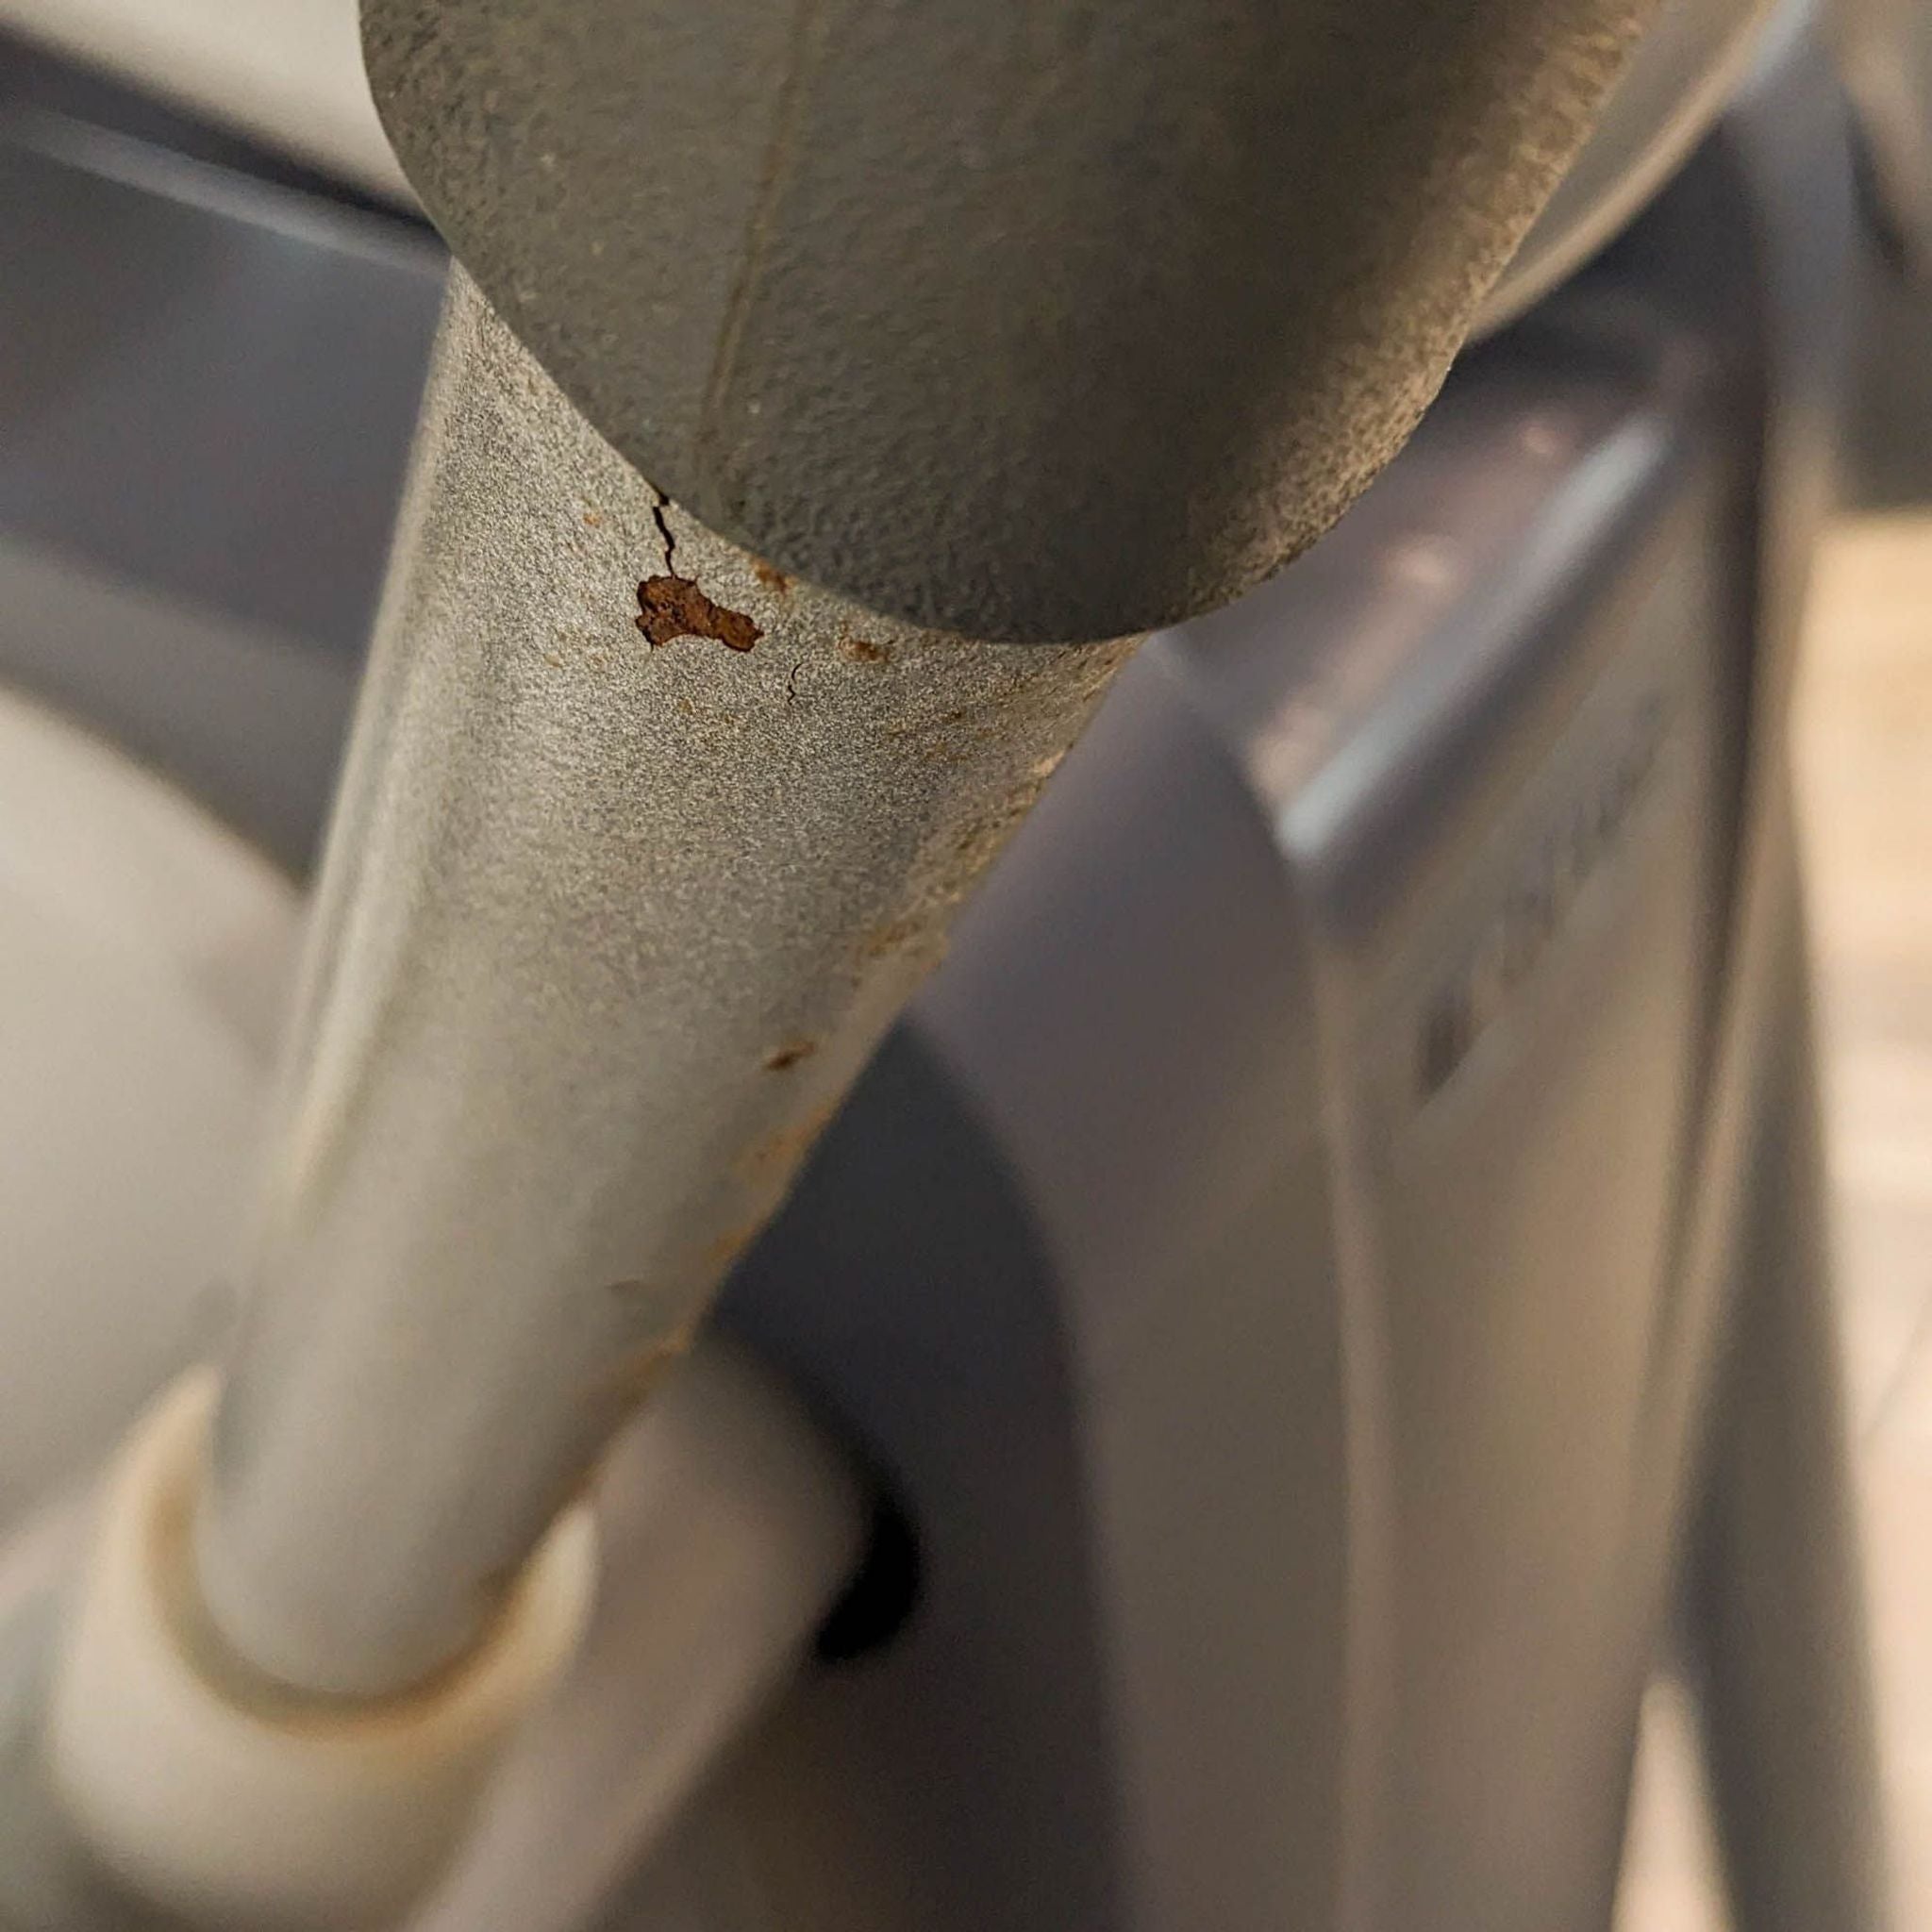 Close-up of rust on the metal part of a Precor gym elliptical equipment.